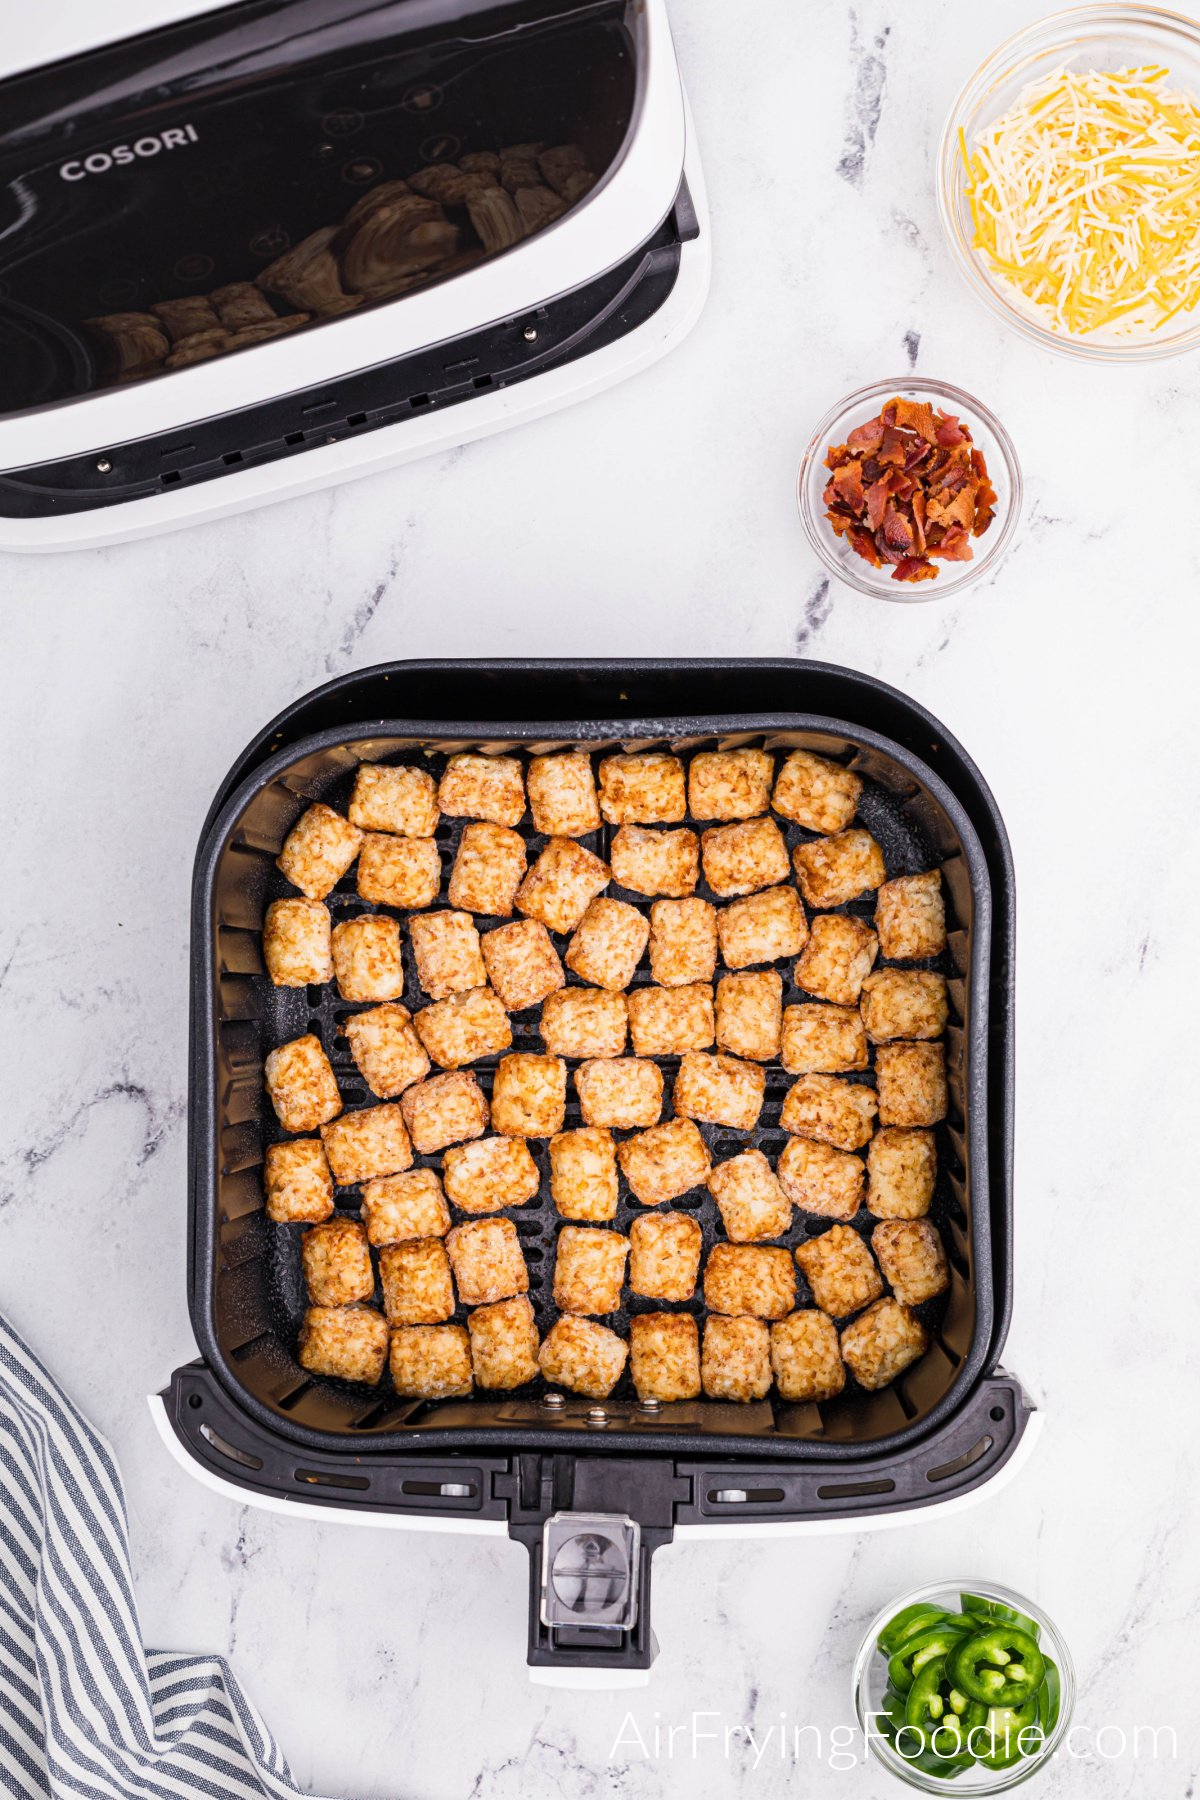 Frozen tater tots in the basket of the air fryer.